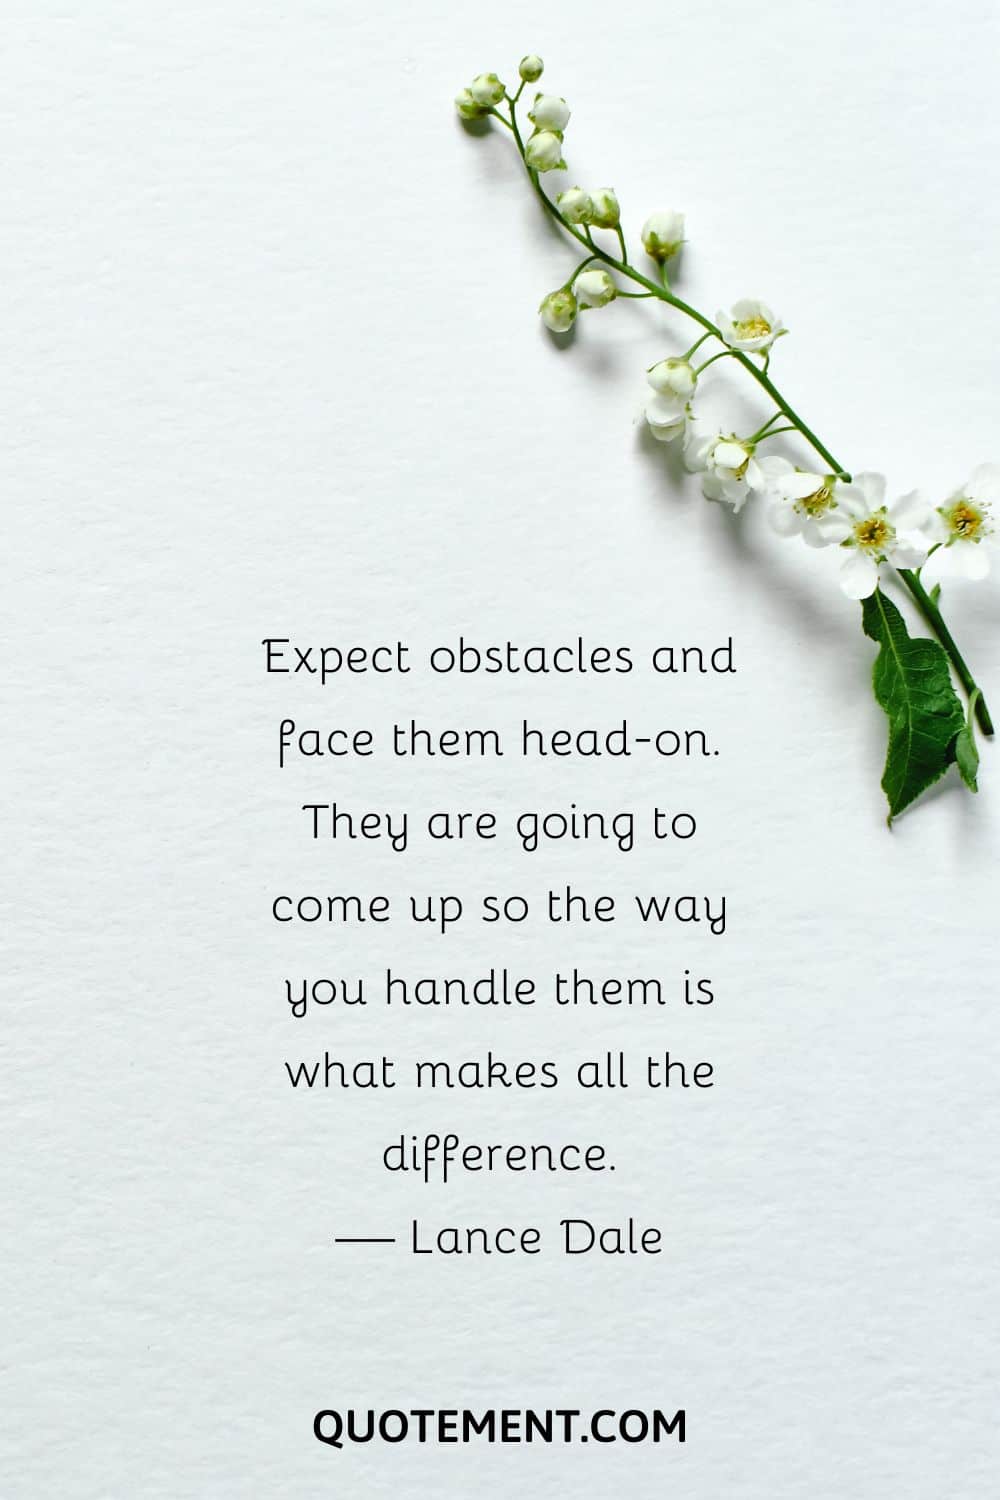 image of a branch with white flowers representing positive quote about life challenges